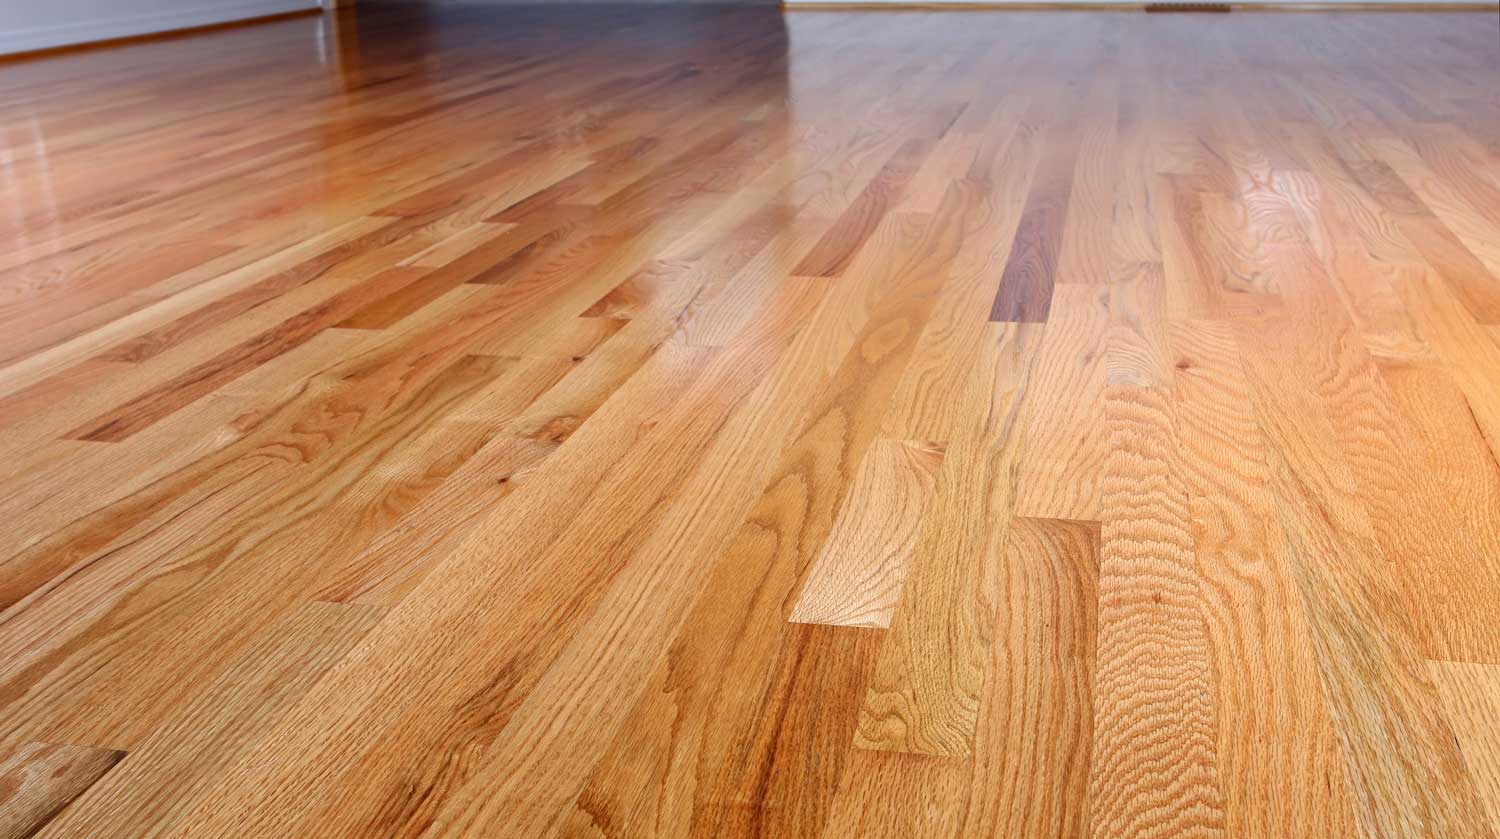 Cost To Refinish A Hardwood Floor, Average Cost To Refinish Hardwood Floors